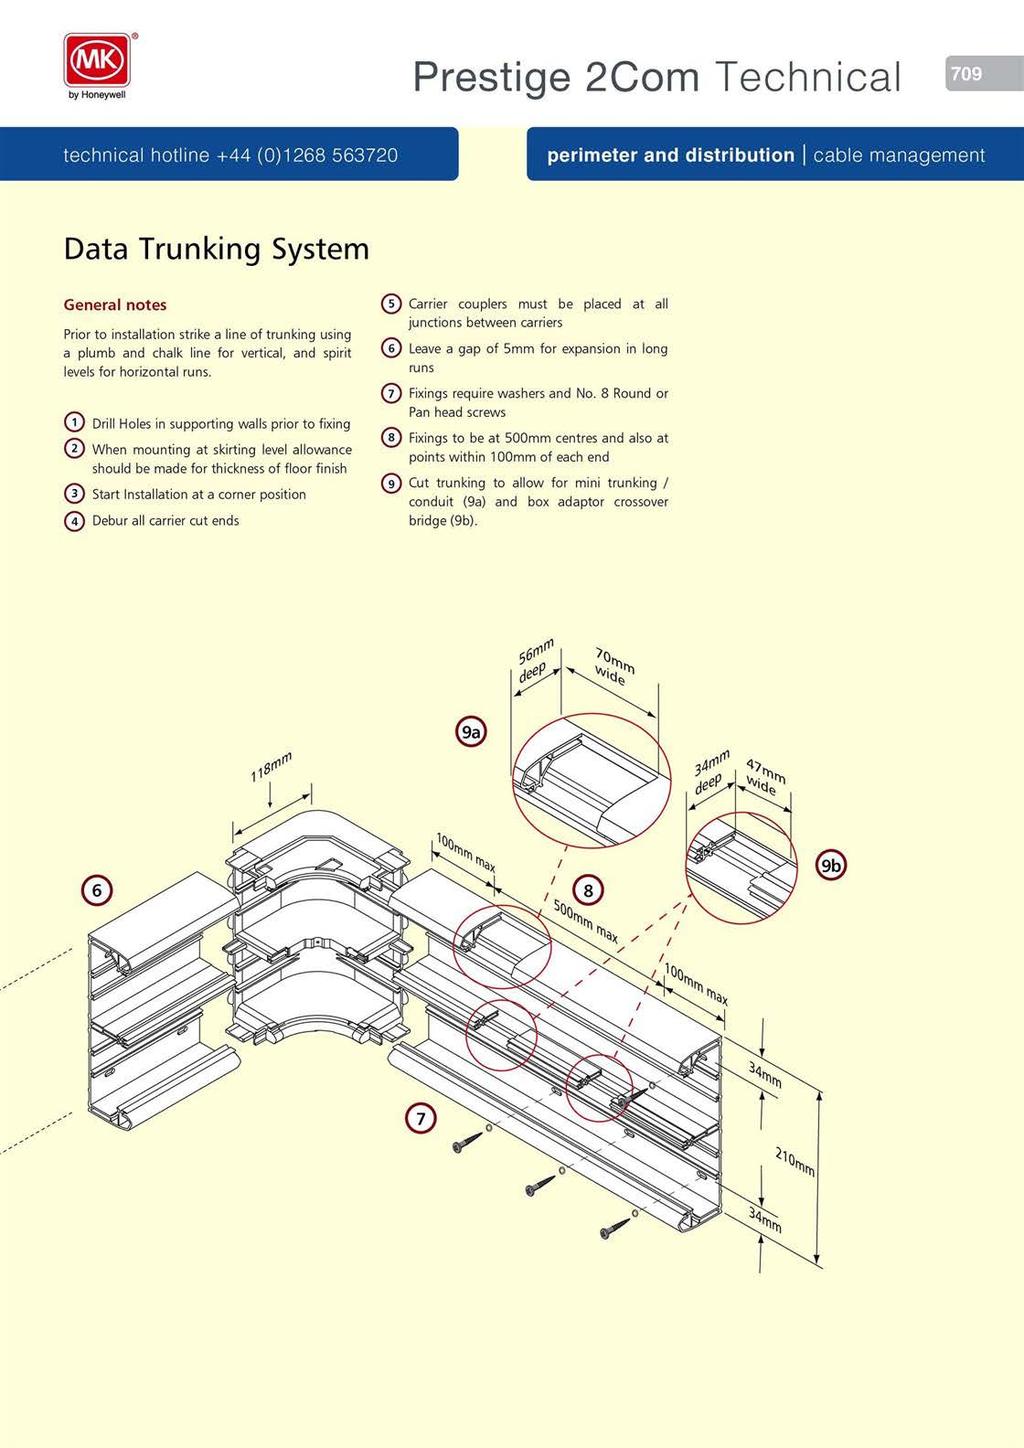 perimeter and distribution cable management General notes Prior to installation strike a line of trunking using a plumb and chalk line for vertical, and spirit levels for horizontal runs.